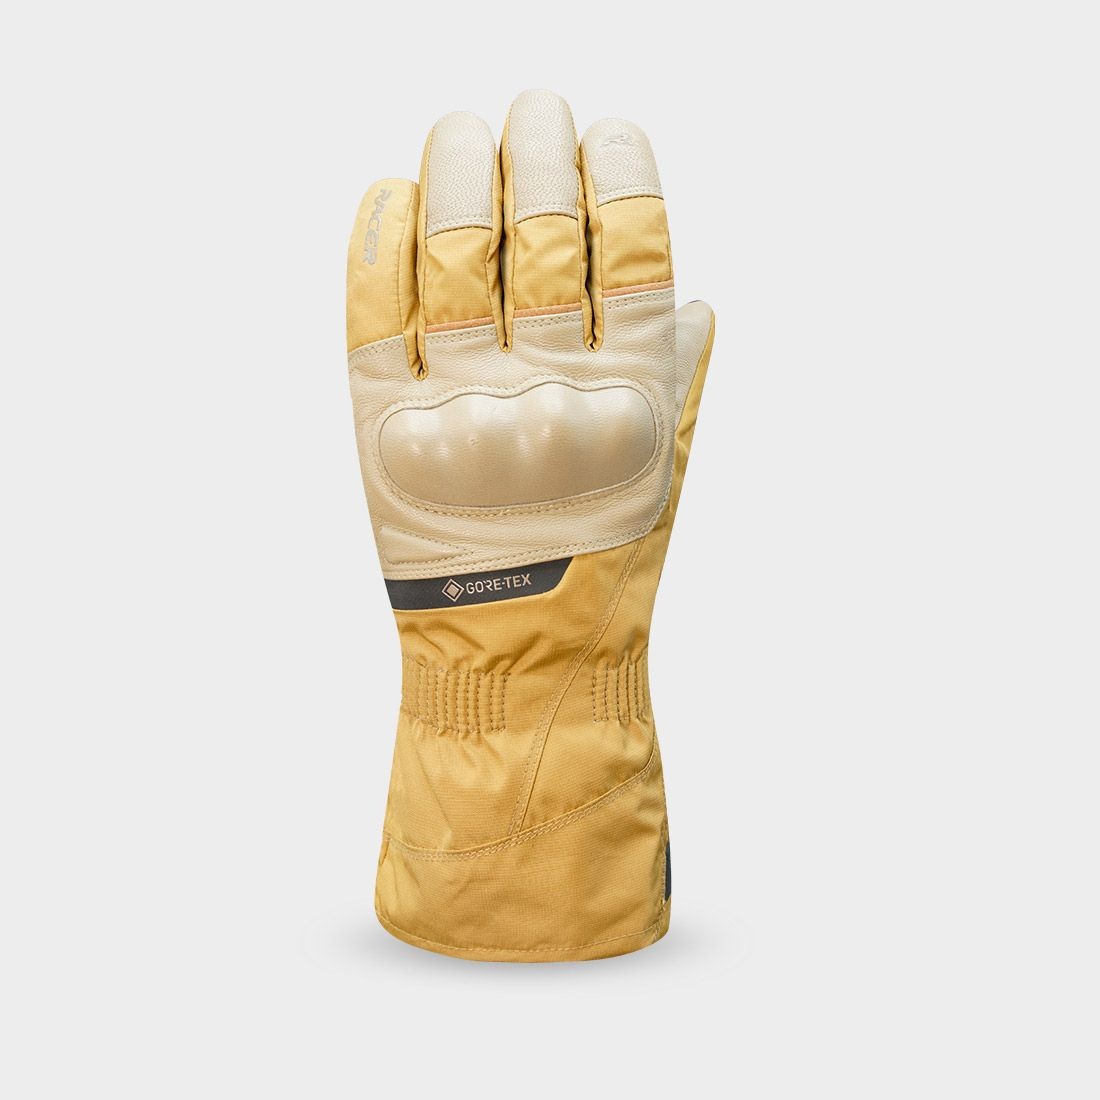 COMMAND GTX - MOTORCYCLE GLOVES